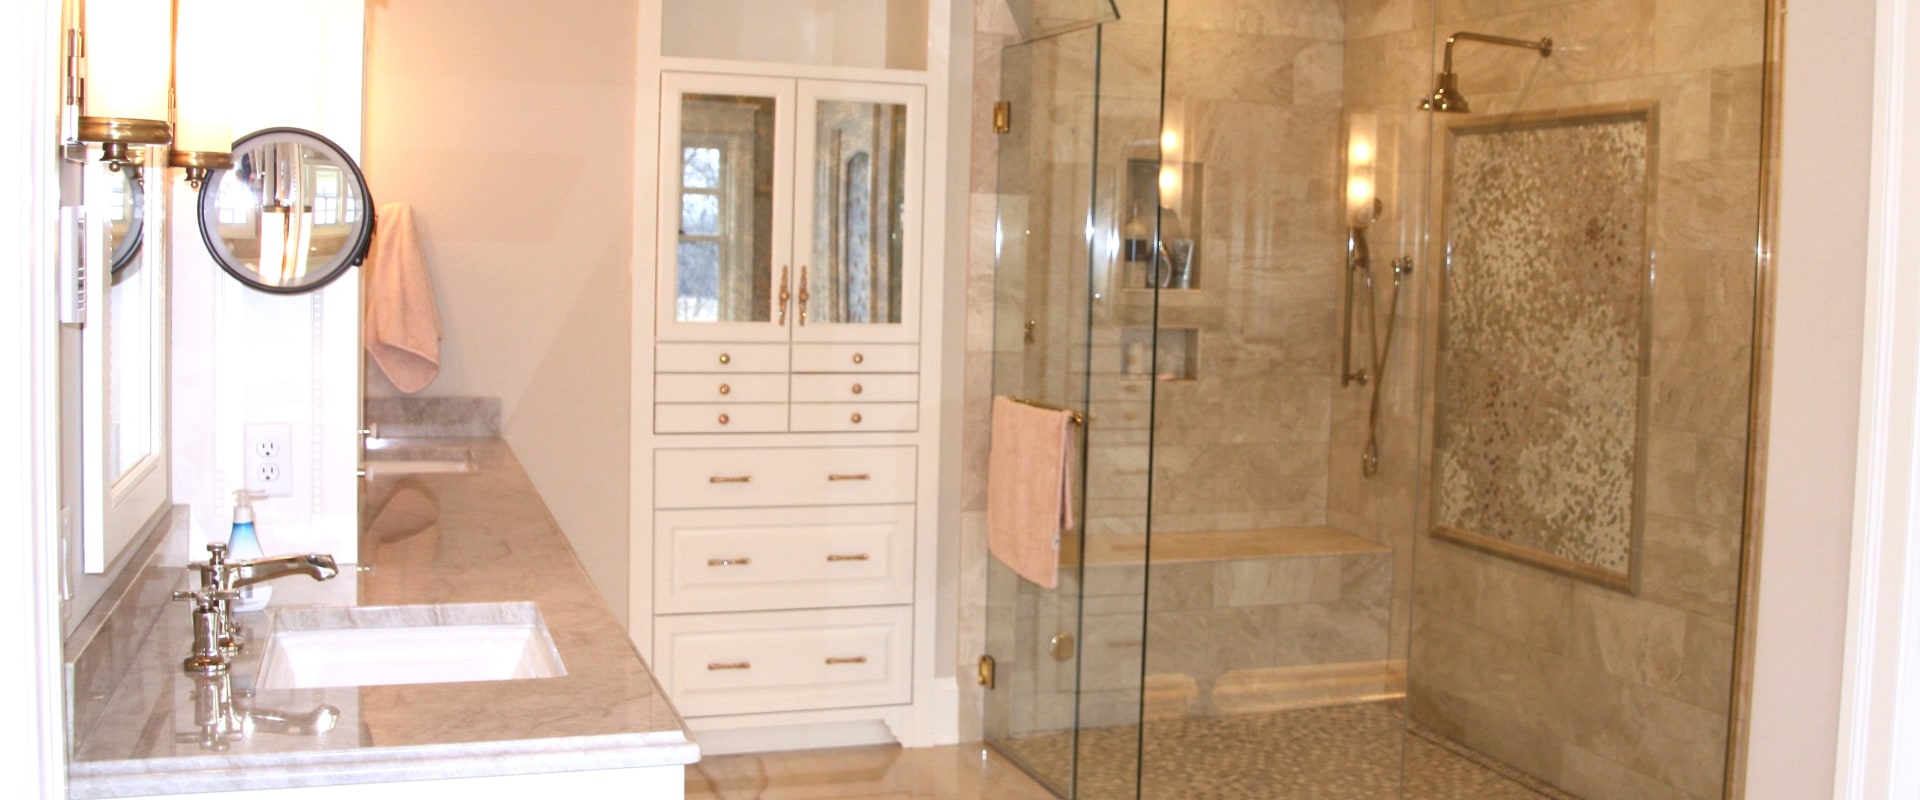 Expert Plumbers In Chanhassen, MN: Transforming Your Home Renovation Dreams Into Reality